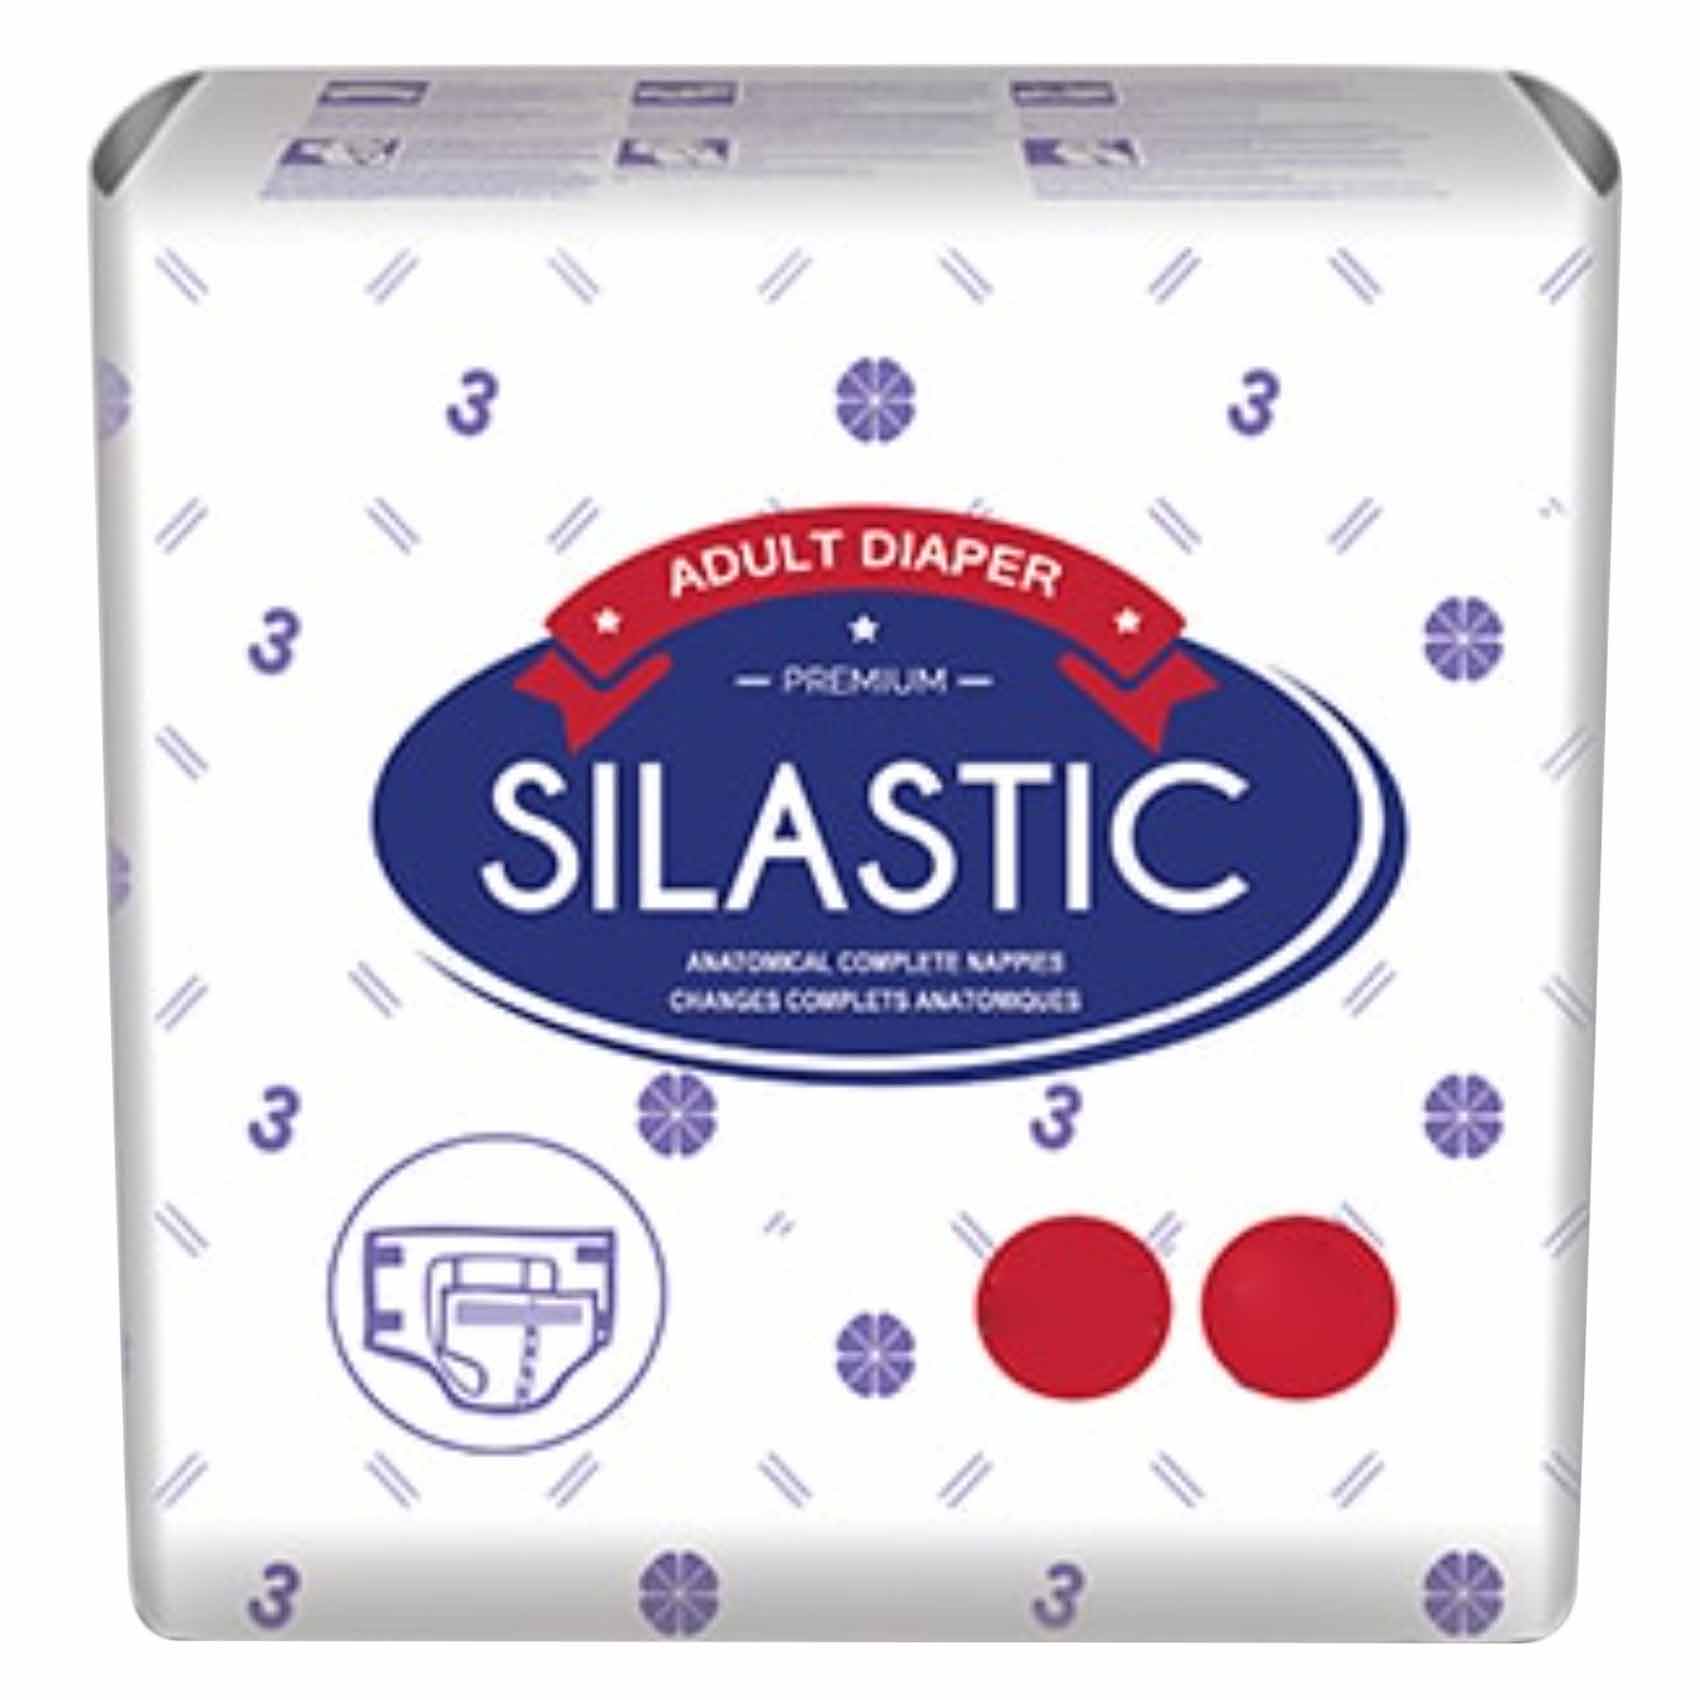 Oui Oui Silastic Adult Diapers N3 12 Inch